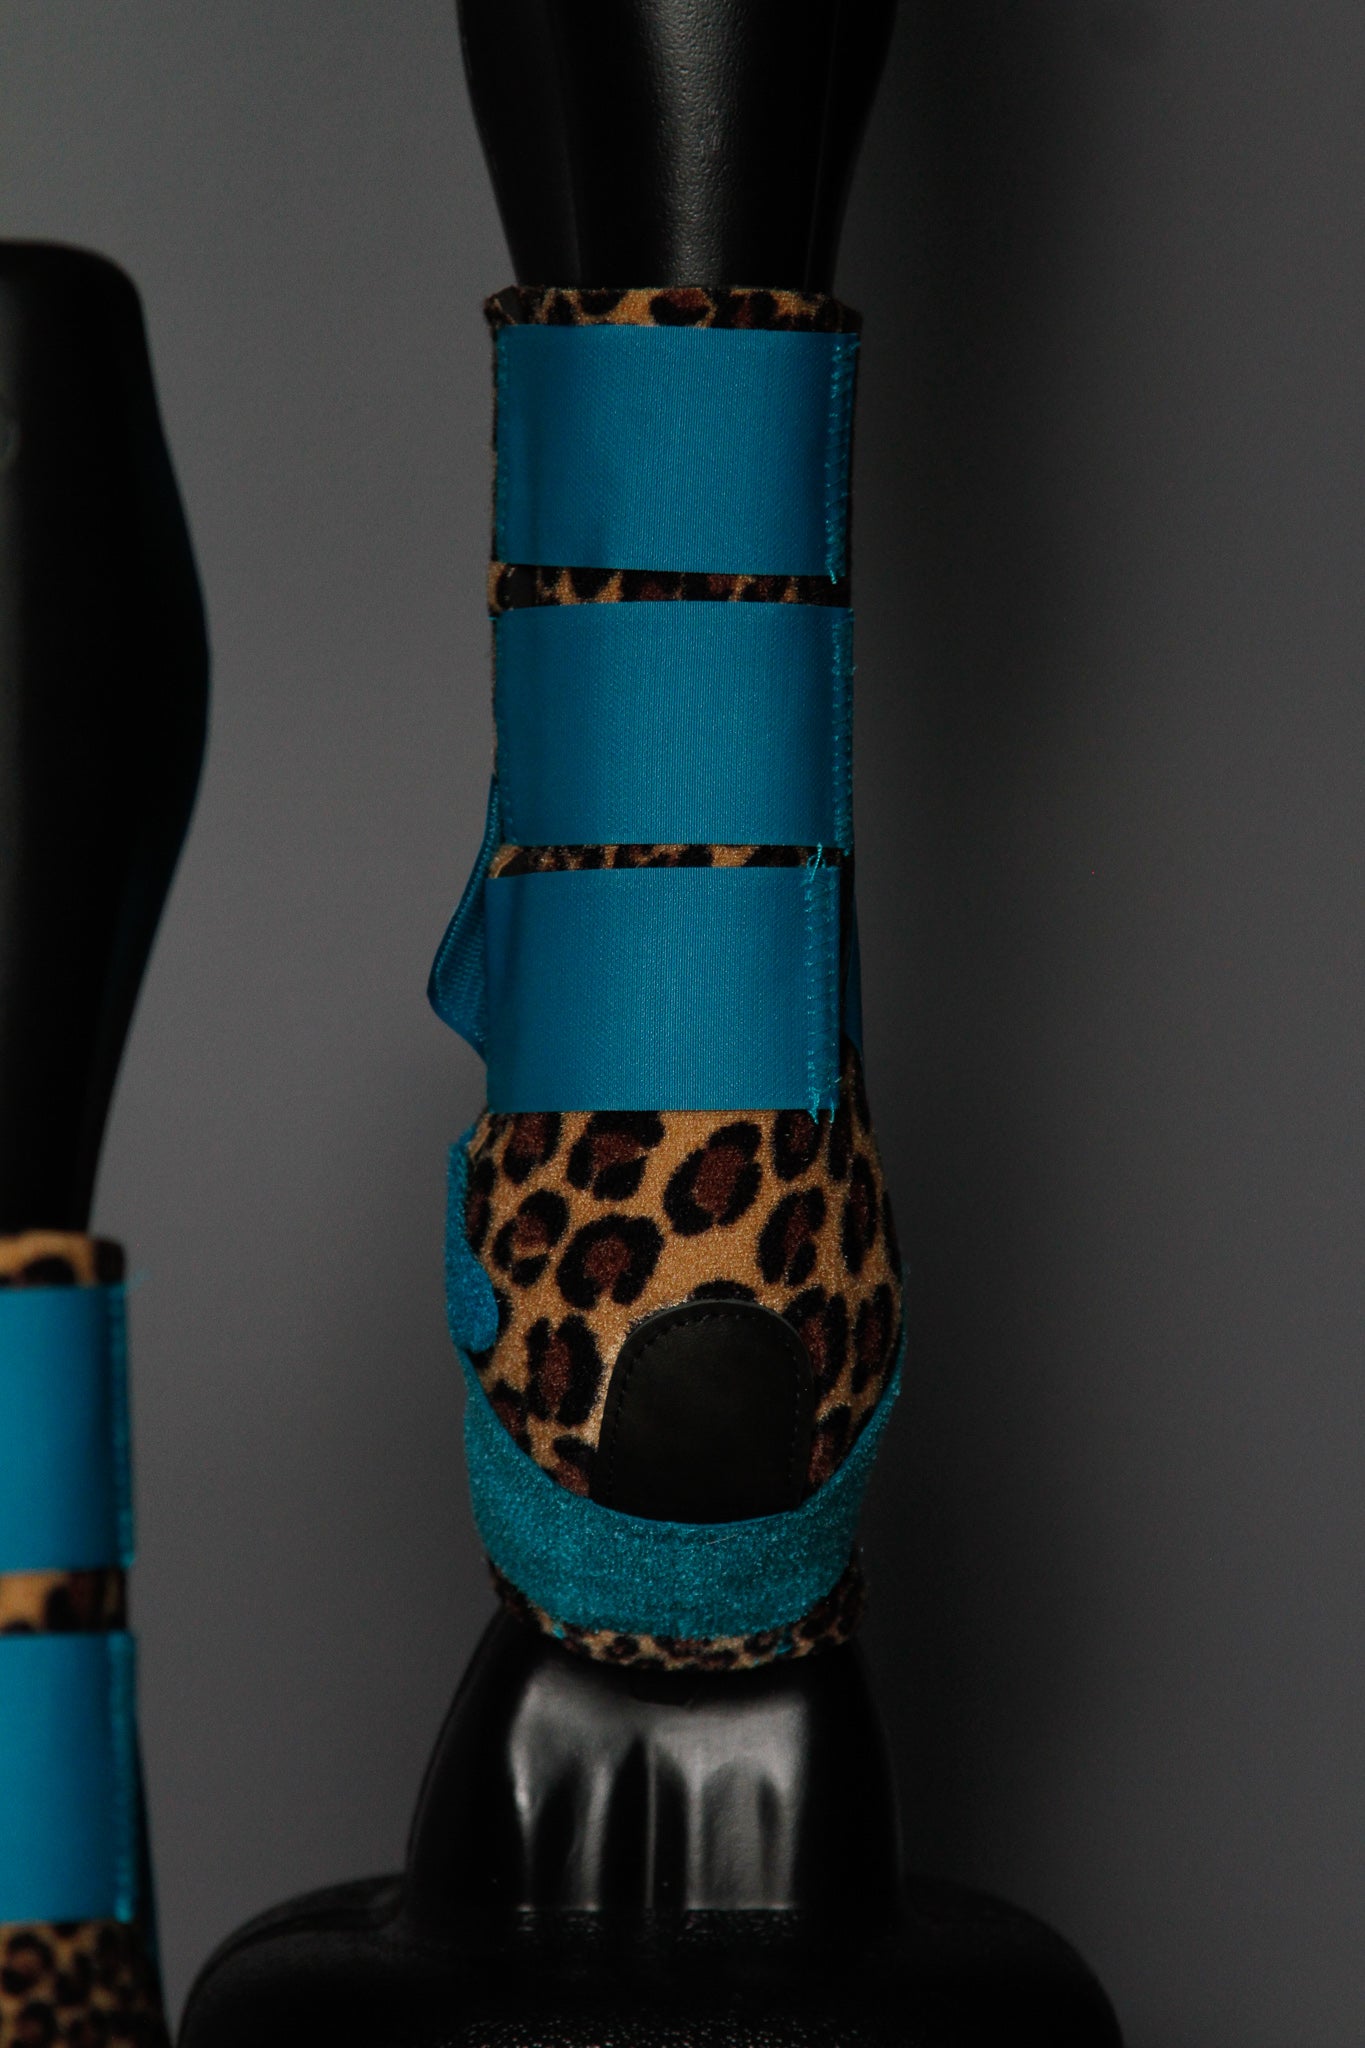 H20 Front & H20 Rear Cheetah Sports Support - Turquoise (7926450946286)